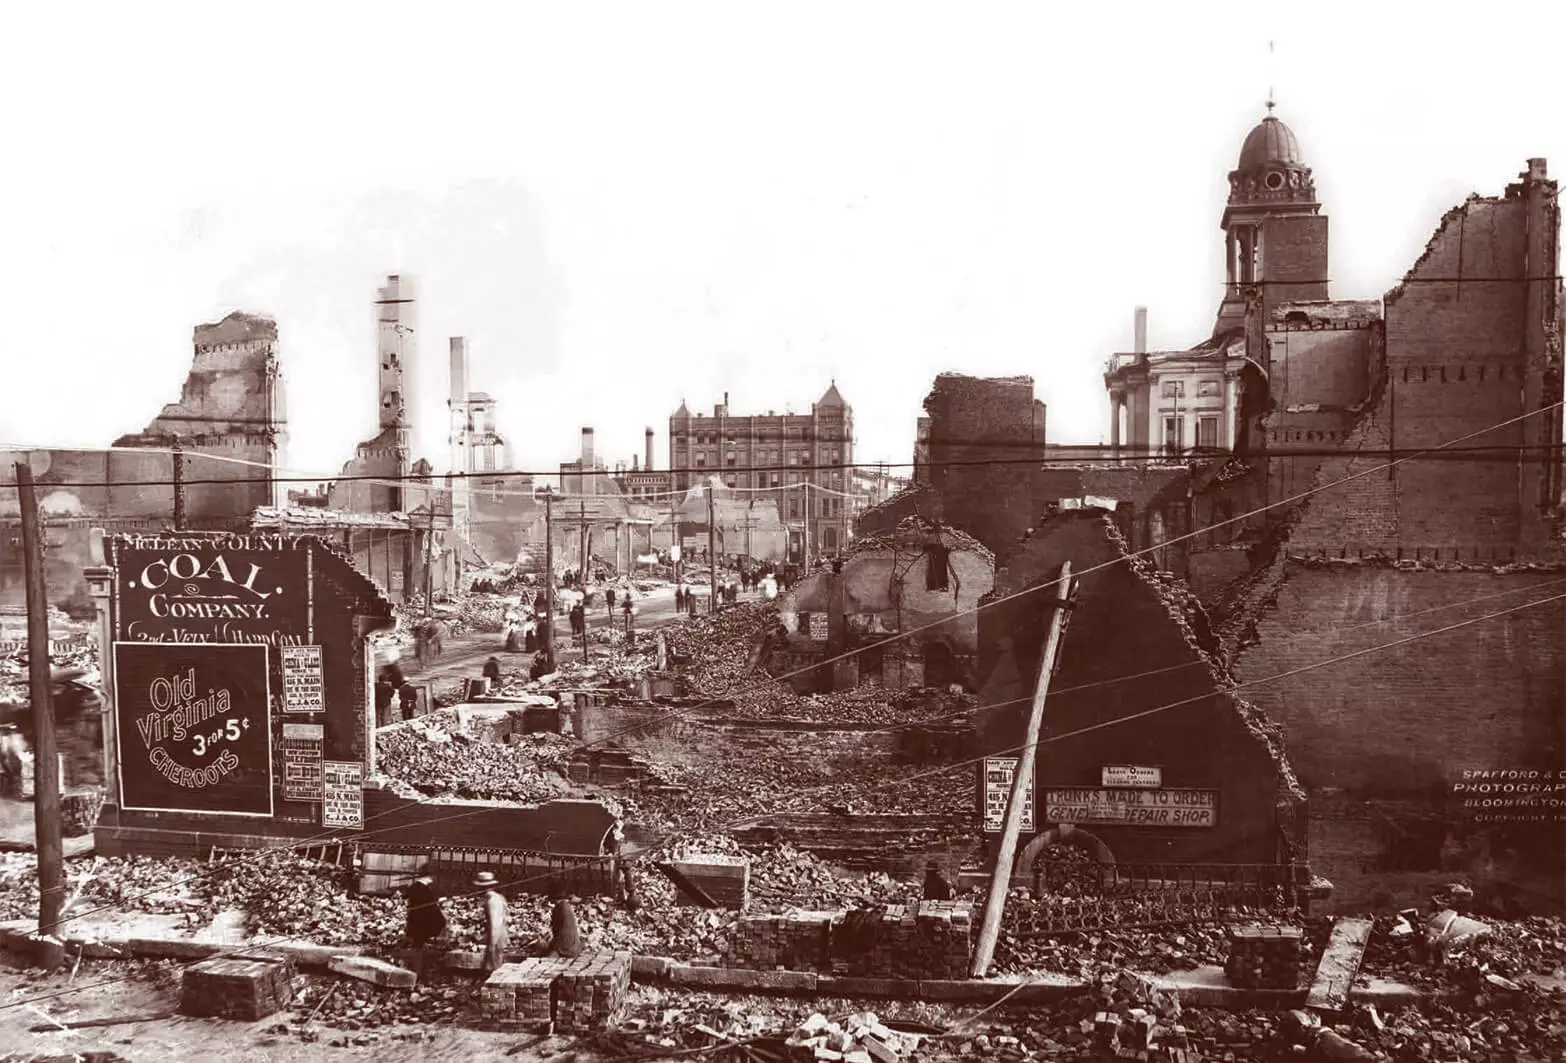 Photo of rubble and destroyed buildings spanning multiple blocks. In the distance you can see the courthouse building and dome, which were destroyed but did not fall down.